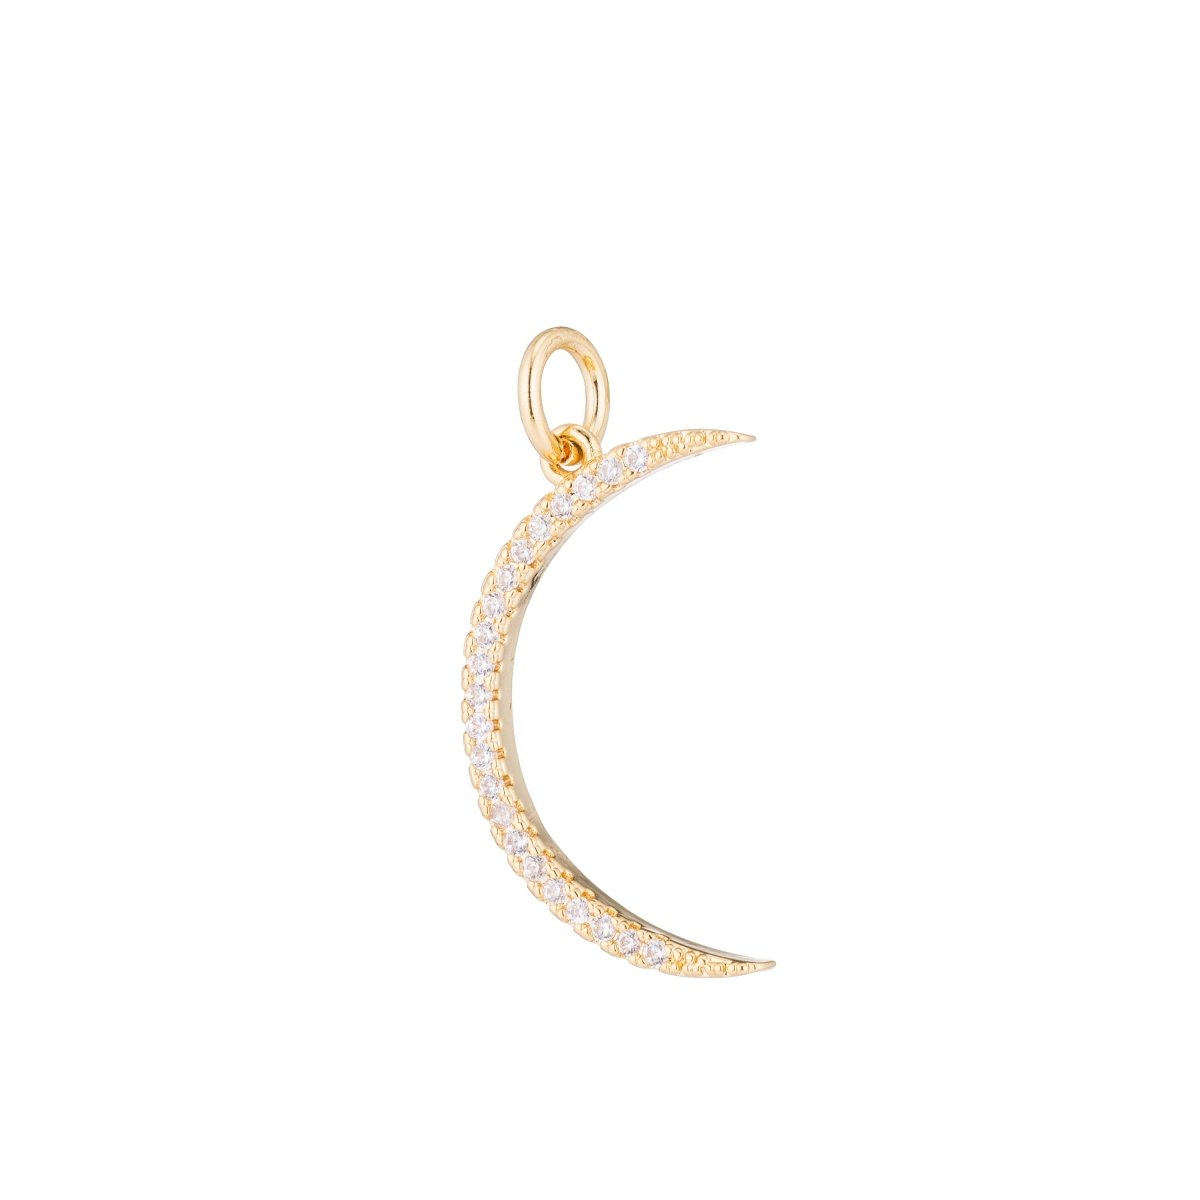 Gold Crescent Moon, Celestial, Wish, Cute Dream Sky Cubic Zirconia Bracelet Necklace Pendant Charm Bead Bails Finding for Jewelry Making H-203 - DLUXCA